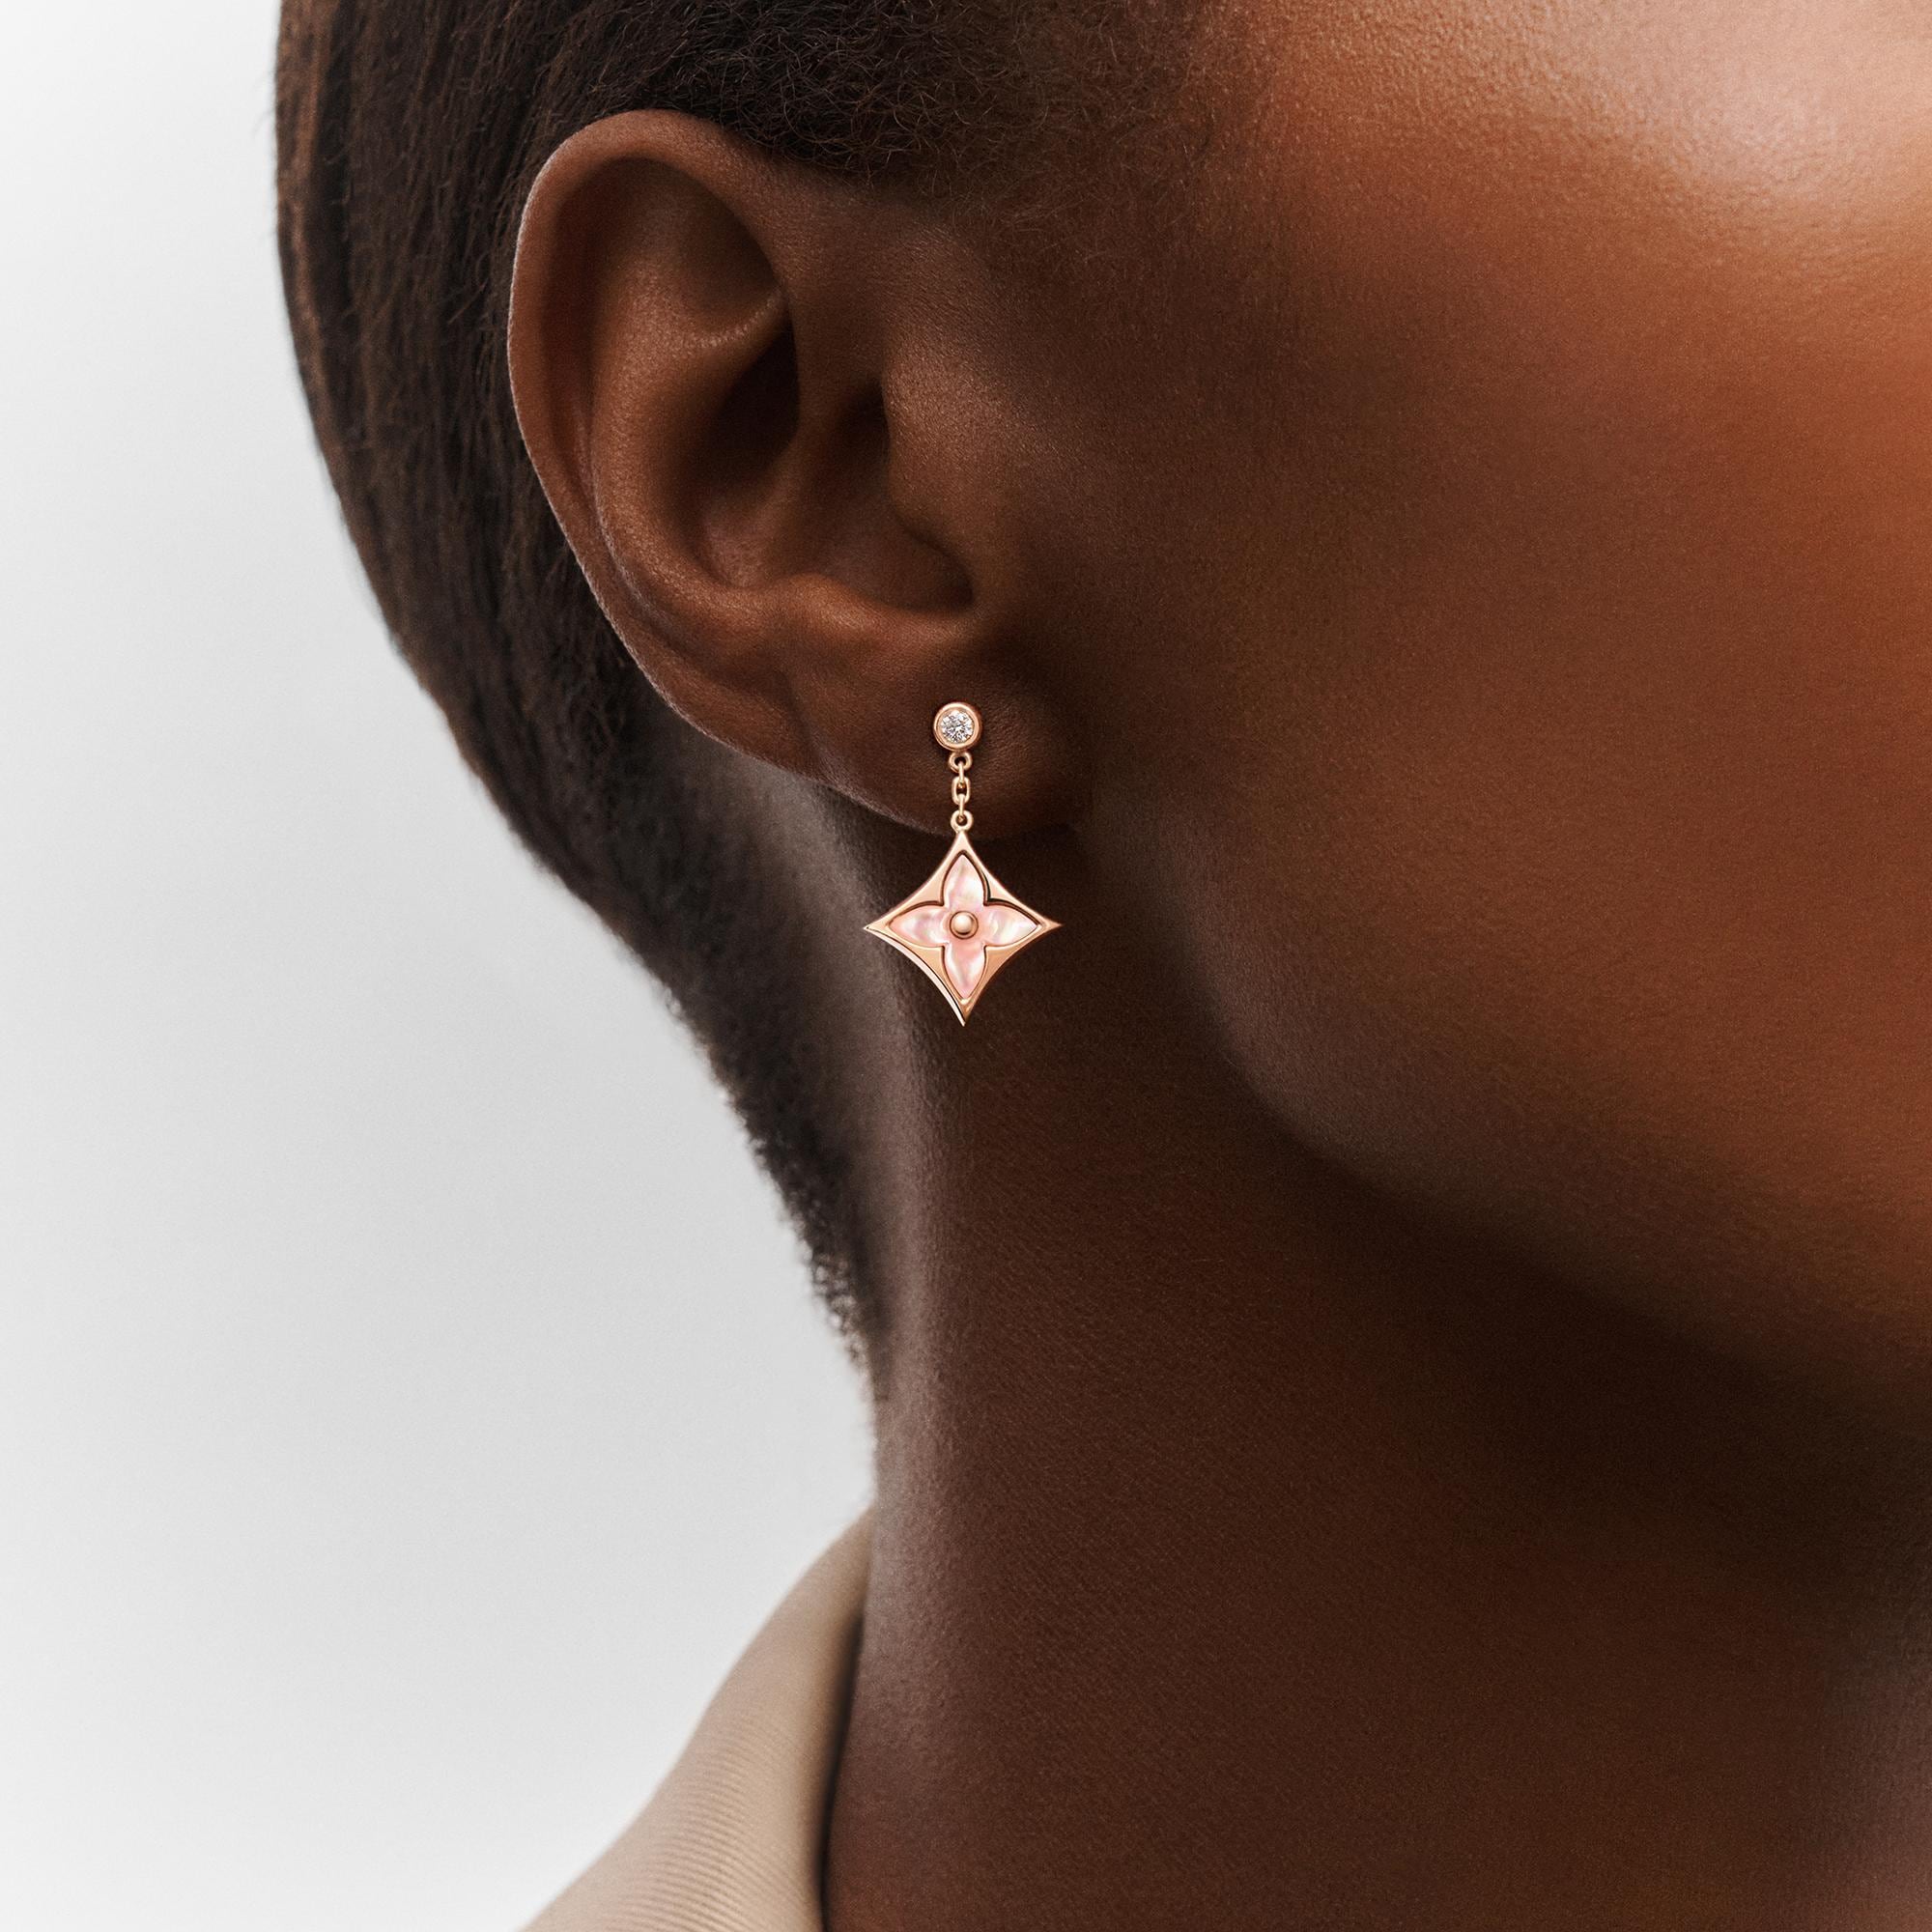 Louis Vuitton Color Blossom BB Star Ear Studs, Pink gold, pink Mother of pearl and diamonds – Jewelry – Categories Q96667